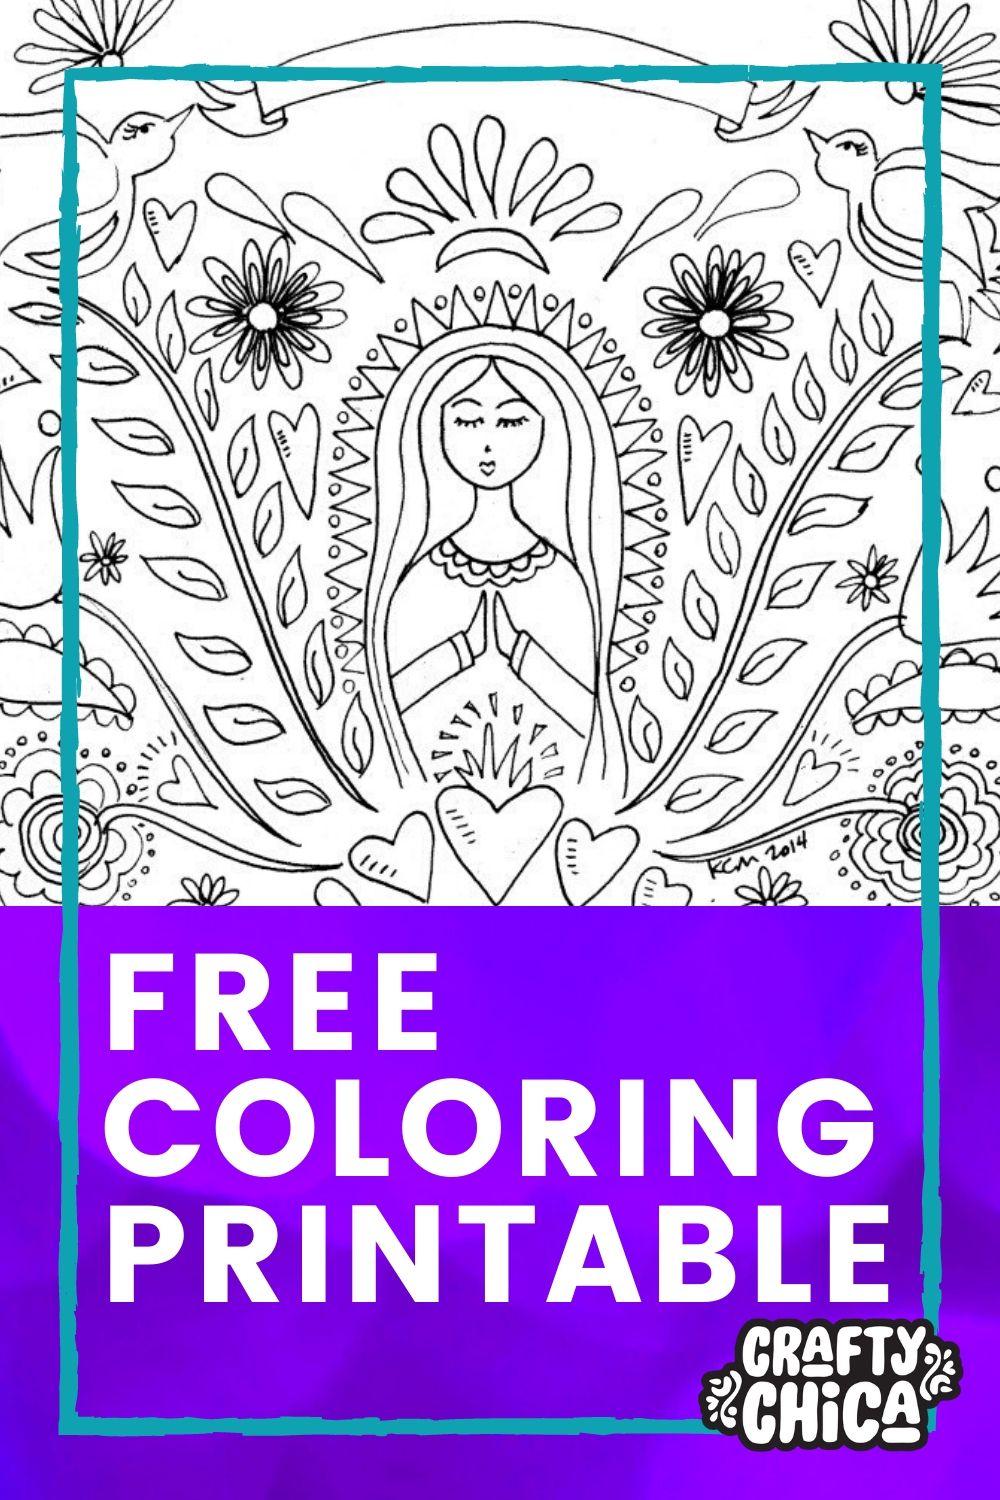 Free Mother Mary coloring page! #craftychica #freeprintable #coloringpage